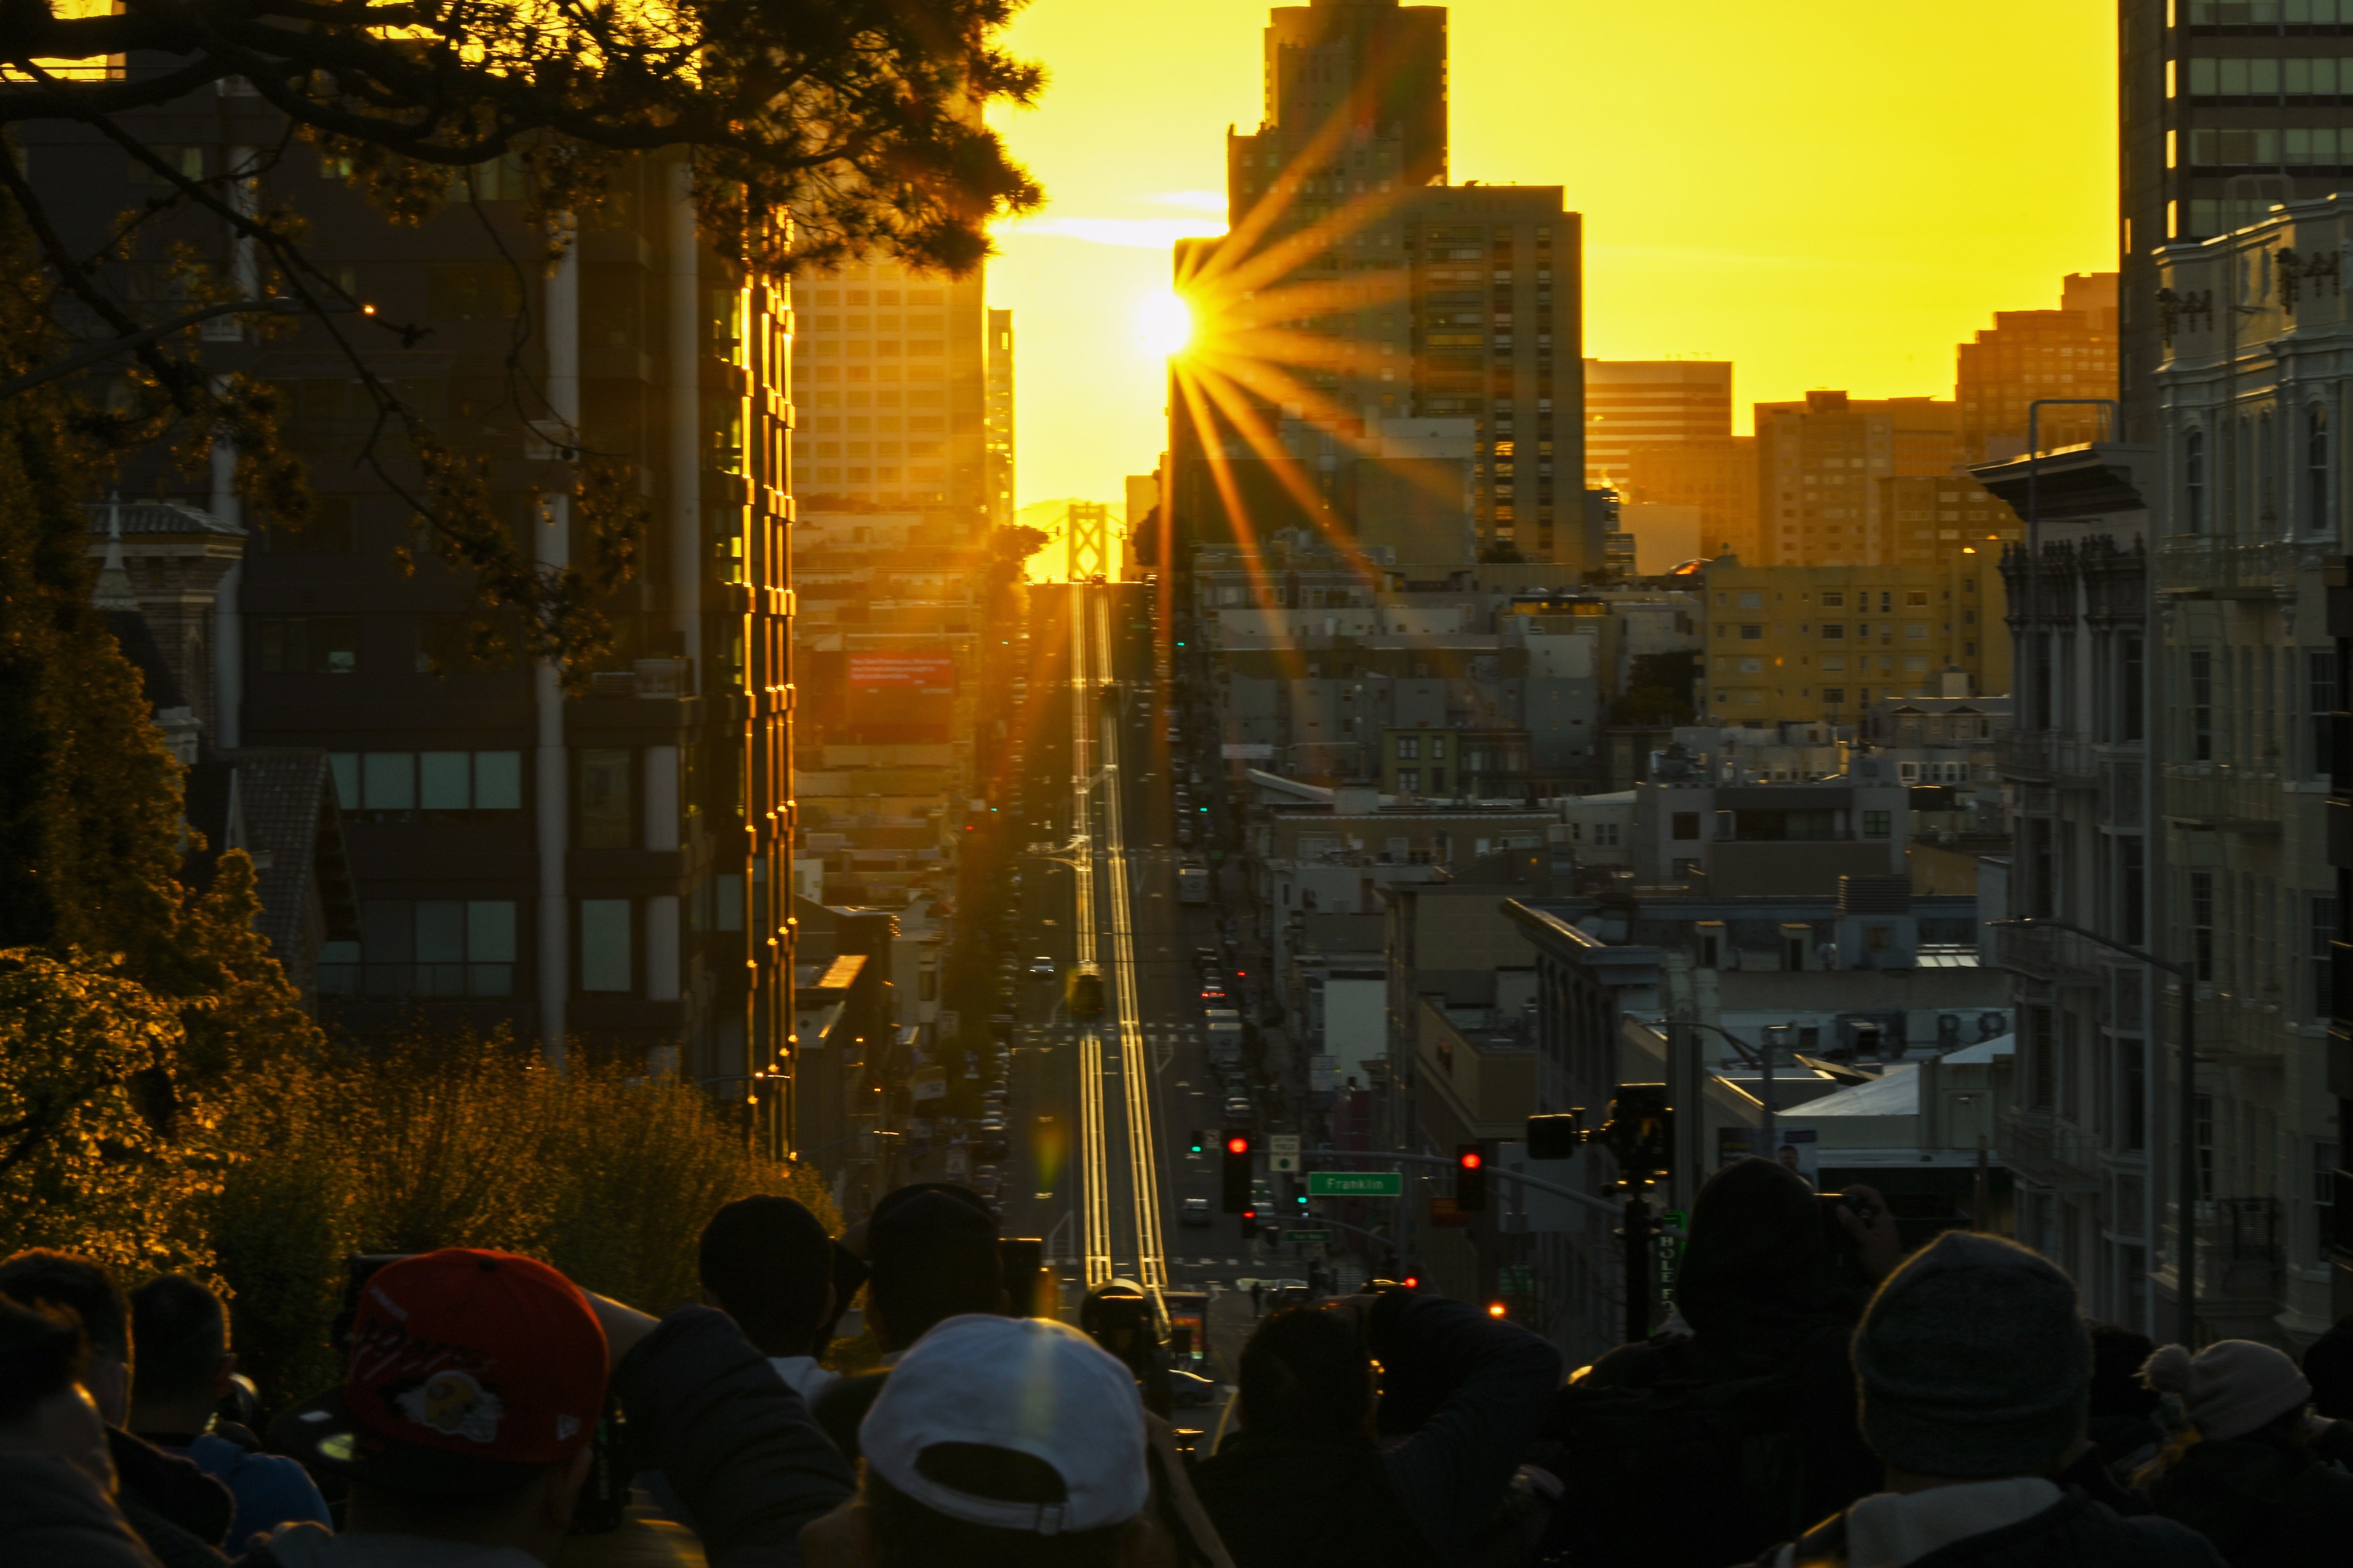 An elevated view of a city street at sunset, showing the sun's rays between buildings with silhouettes of people in the foreground.